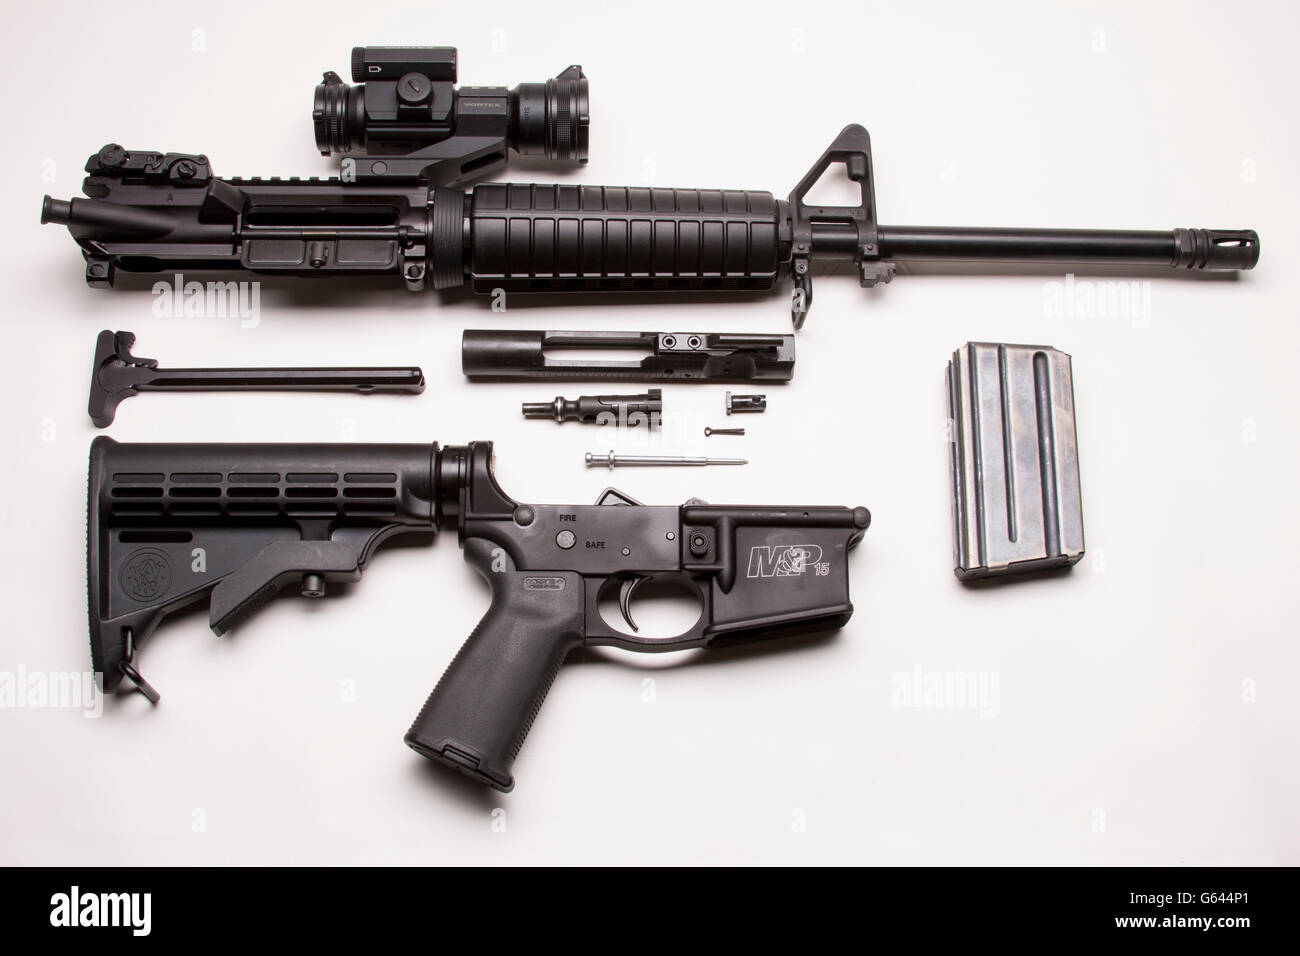 Smith & Wesson AR 15 Field Stripped Stock Photo